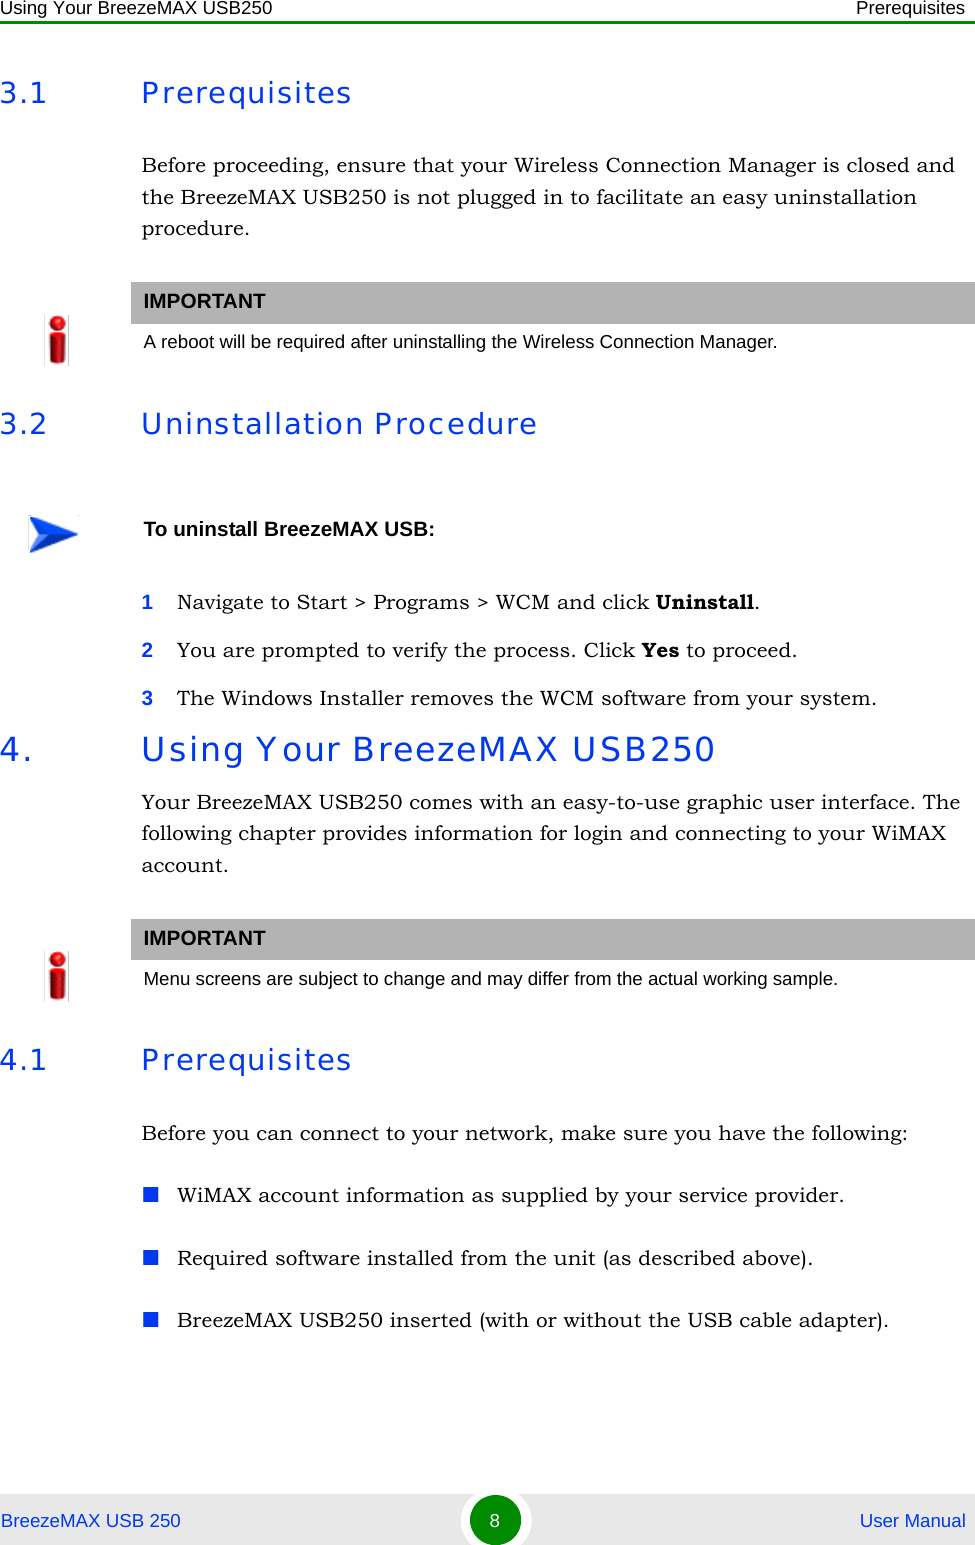 Using Your BreezeMAX USB250 PrerequisitesBreezeMAX USB 250 8 User Manual3.1 PrerequisitesBefore proceeding, ensure that your Wireless Connection Manager is closed and the BreezeMAX USB250 is not plugged in to facilitate an easy uninstallation procedure.3.2 Uninstallation Procedure1Navigate to Start &gt; Programs &gt; WCM and click Uninstall.2You are prompted to verify the process. Click Yes to proceed.3The Windows Installer removes the WCM software from your system.4. Using Your BreezeMAX USB250Your BreezeMAX USB250 comes with an easy-to-use graphic user interface. The following chapter provides information for login and connecting to your WiMAX account.4.1 PrerequisitesBefore you can connect to your network, make sure you have the following:WiMAX account information as supplied by your service provider.Required software installed from the unit (as described above).BreezeMAX USB250 inserted (with or without the USB cable adapter).IMPORTANTA reboot will be required after uninstalling the Wireless Connection Manager.To uninstall BreezeMAX USB:IMPORTANTMenu screens are subject to change and may differ from the actual working sample.